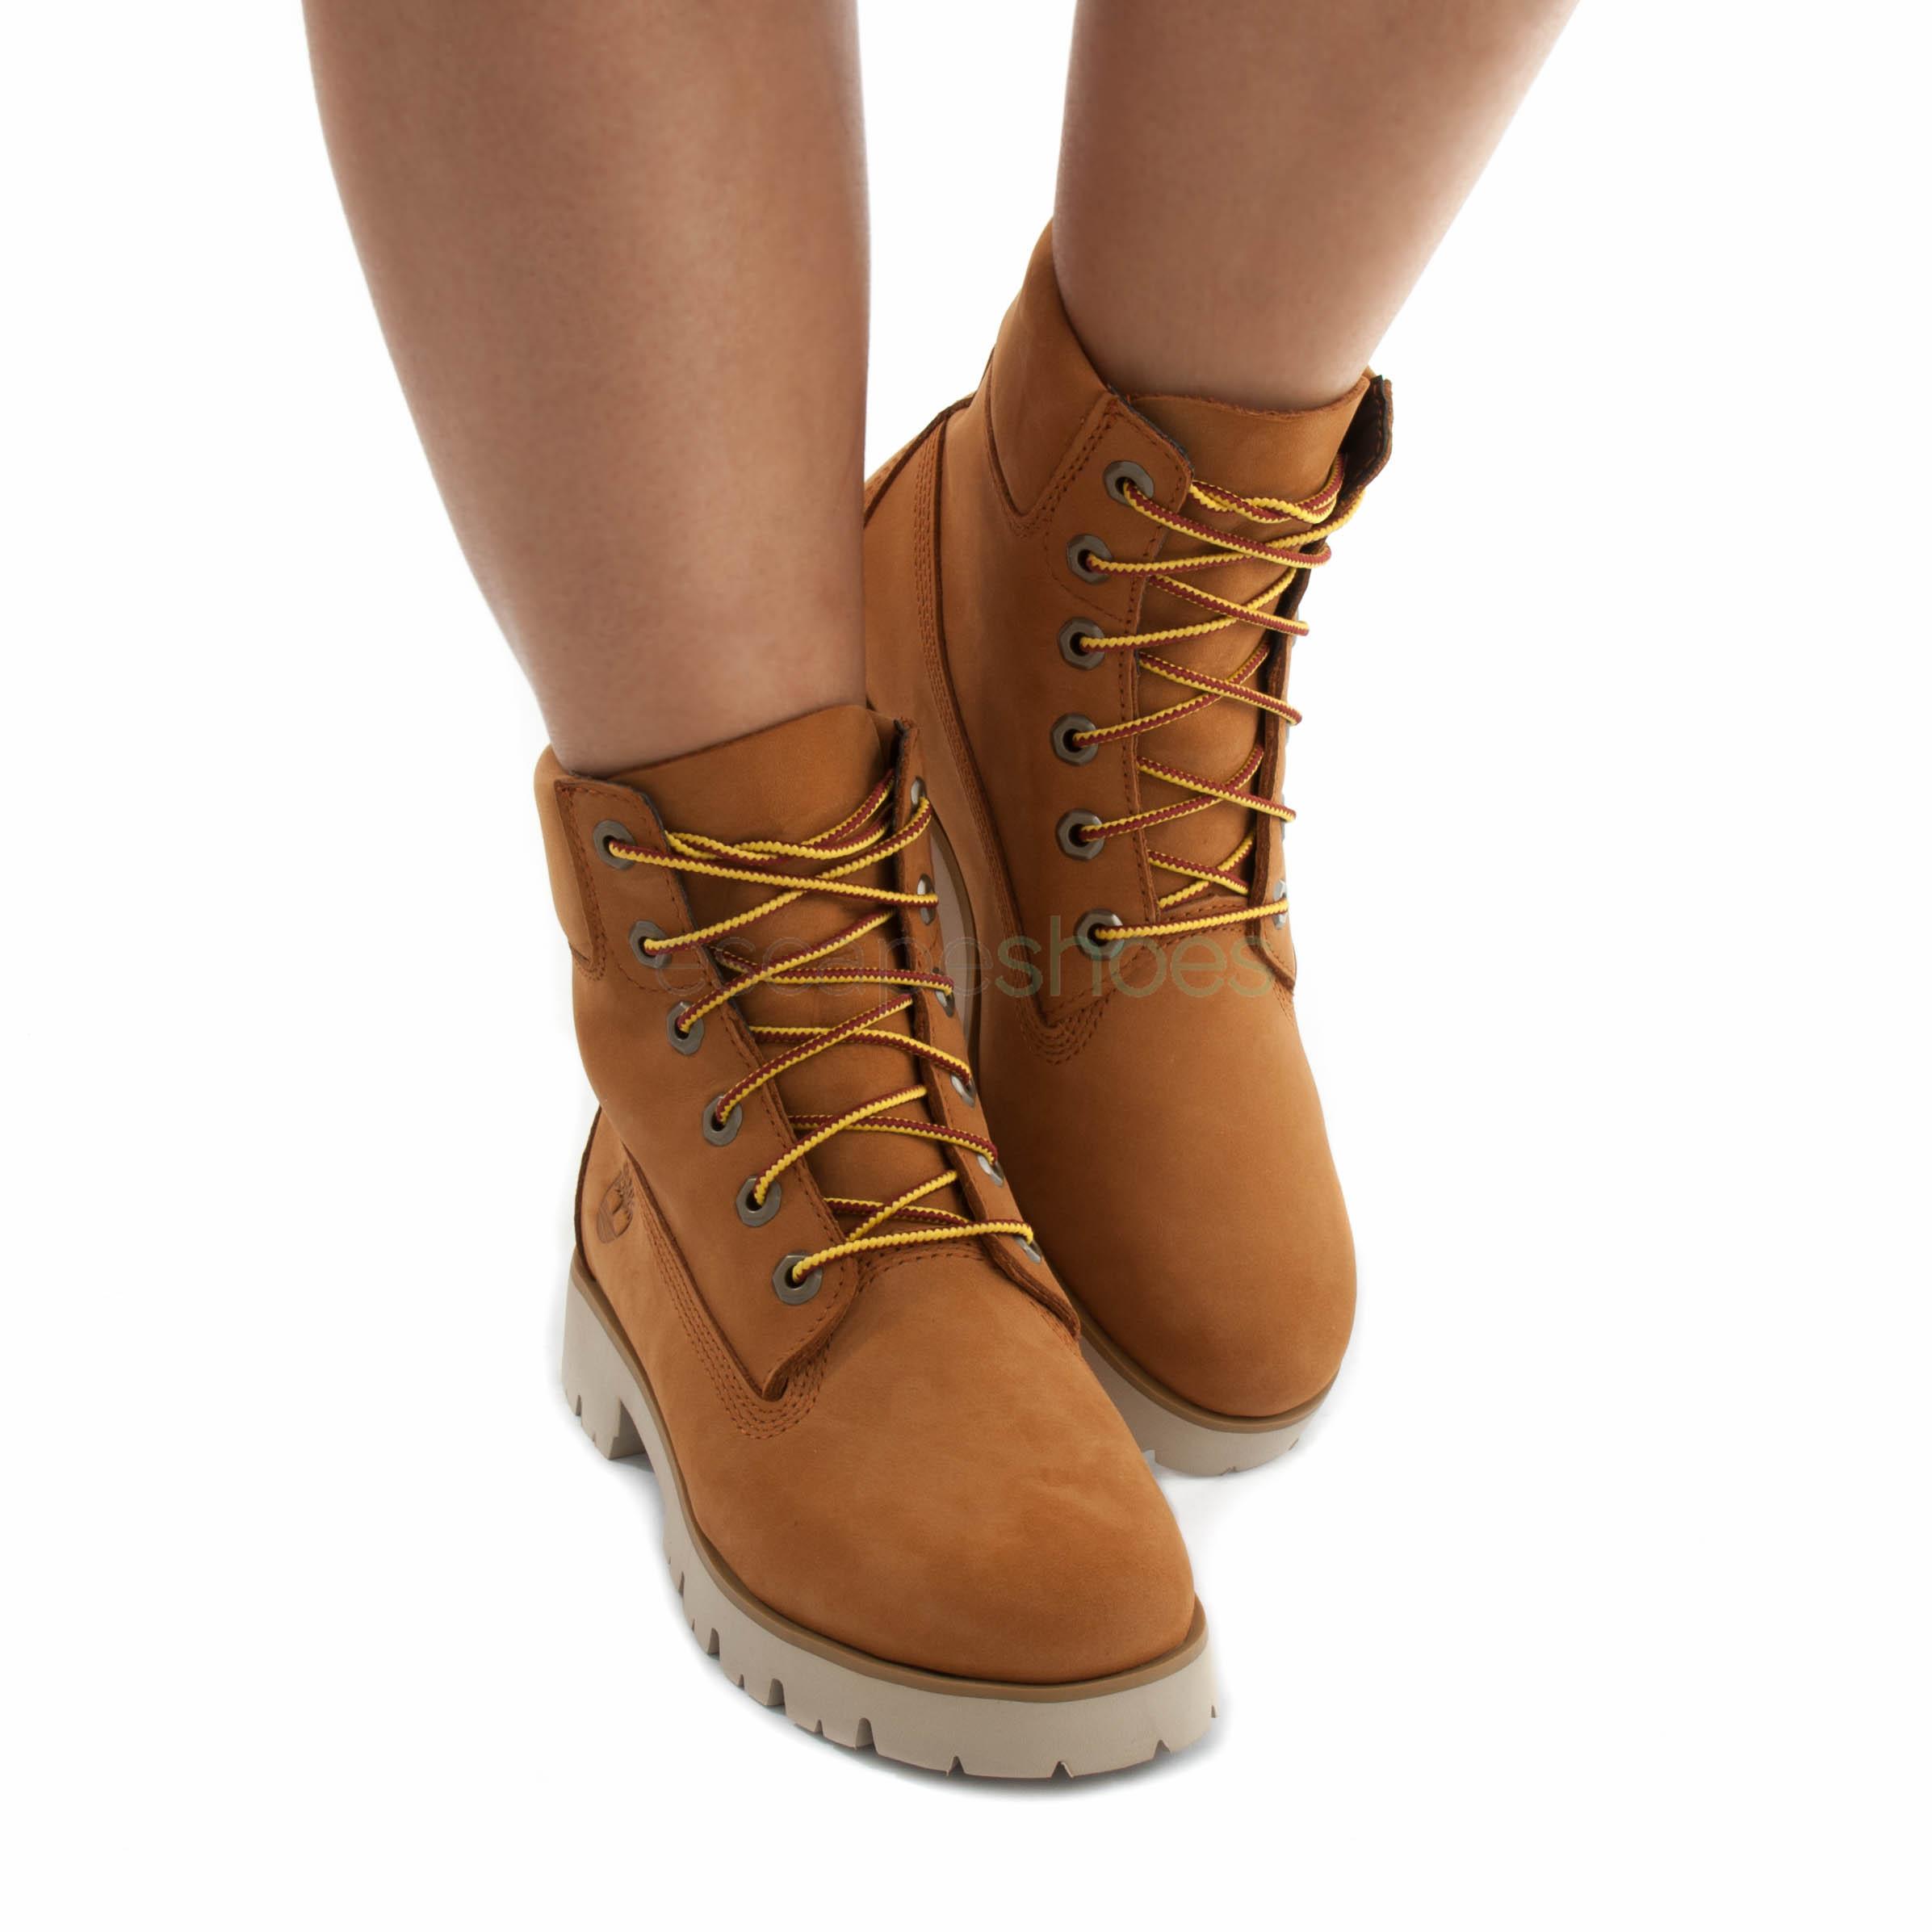 Timberland Women Heritage Lite Inch Classic Boots | vlr.eng.br